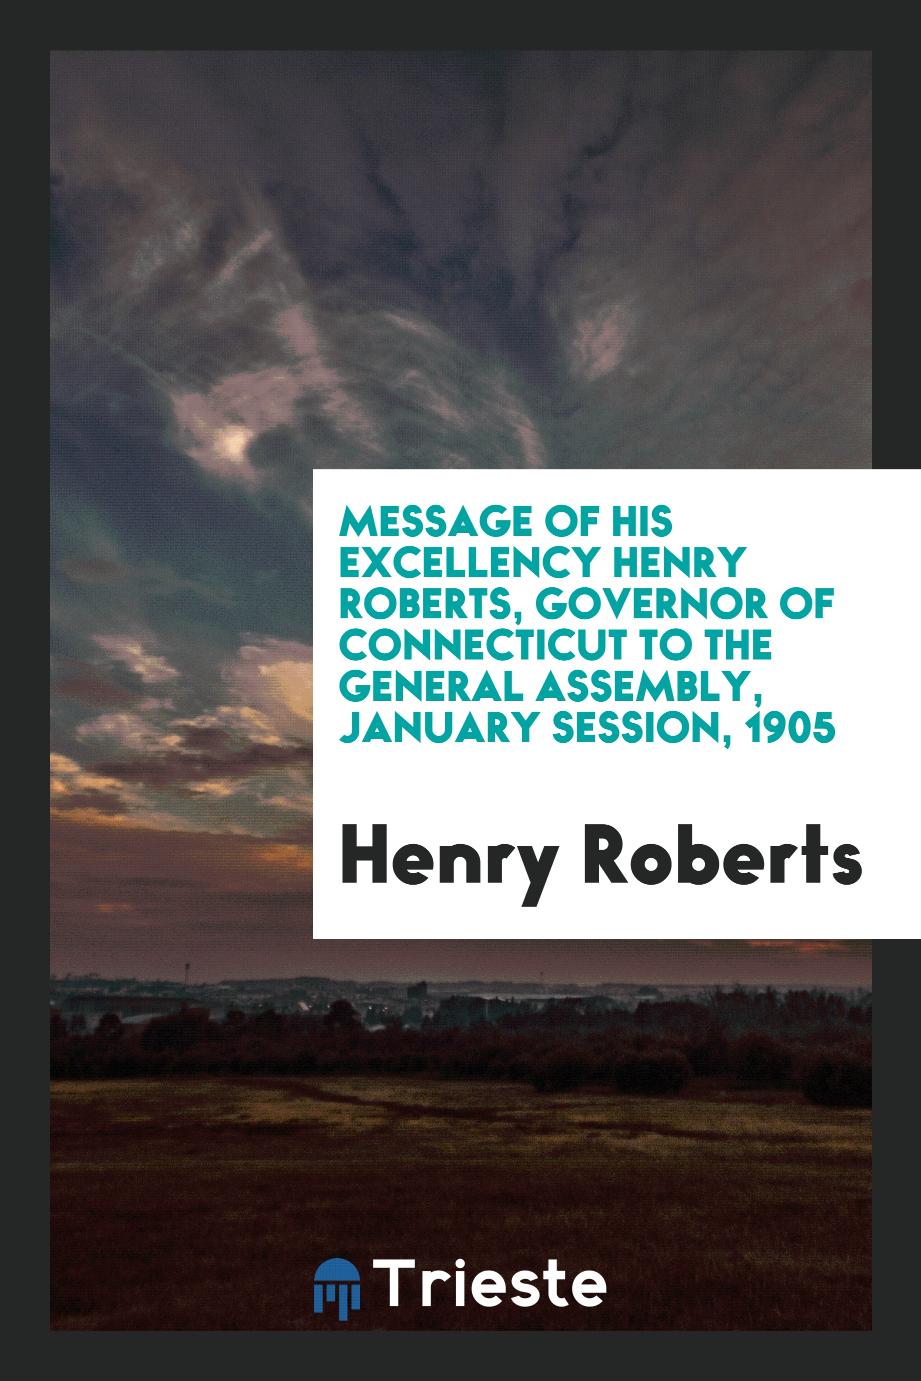 Message of His Excellency Henry Roberts, Governor of Connecticut To the General Assembly, January Session, 1905